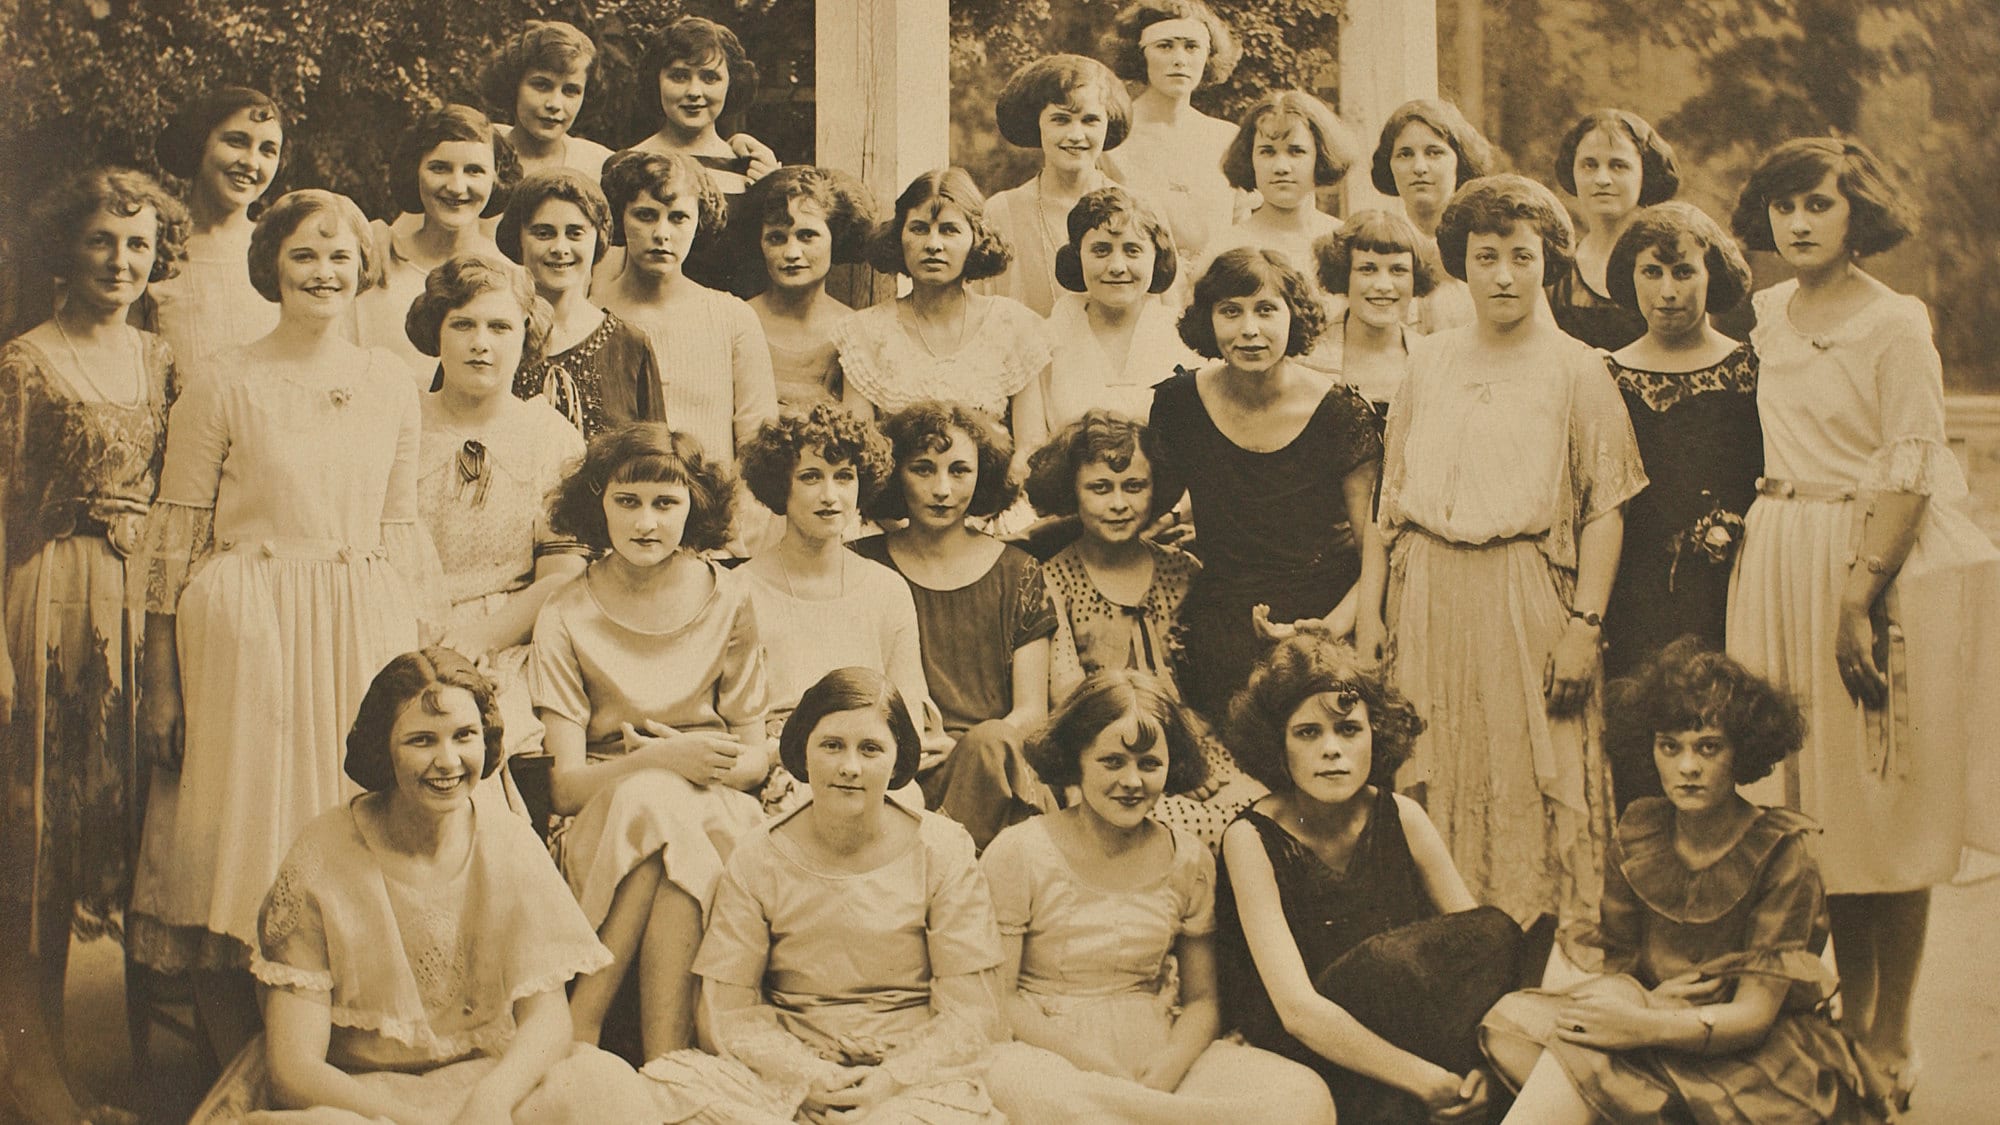 Women's College students pose in a historic photo